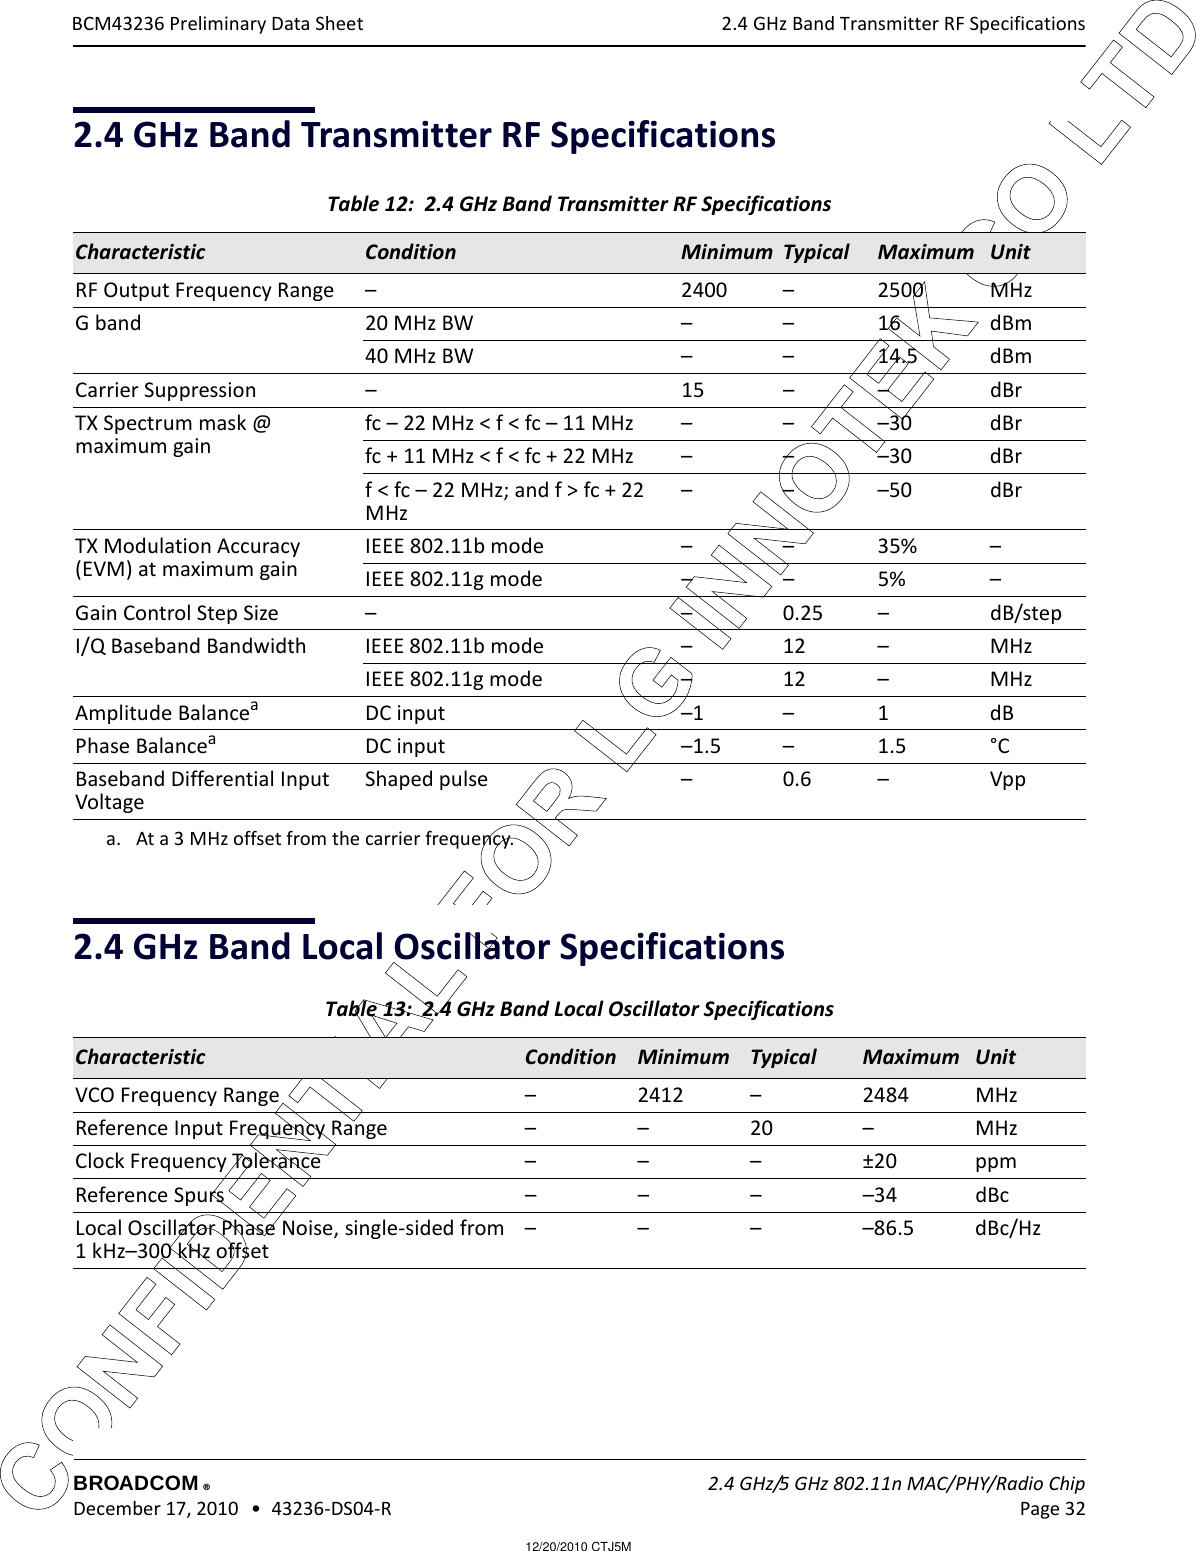 12/20/2010 CTJ5MCONFIDENTIAL FOR LG INNOTEK CO LTD 2.4 GHz Band Transmitter RF SpecificationsBROADCOM    2.4 GHz/5 GHz 802.11n MAC/PHY/Radio Chip December 17, 2010   •  43236-DS04-R Page 32®BCM43236 Preliminary Data Sheet2.4 GHz Band Transmitter RF Specifications2.4 GHz Band Local Oscillator SpecificationsTable 12:  2.4 GHz Band Transmitter RF Specifications Characteristic Condition Minimum Typical  Maximum UnitRF Output Frequency Range – 2400 – 2500 MHzG band 20 MHz BW – – 16  dBm40 MHz BW – – 14.5 dBmCarrier Suppression – 15 – – dBrTX Spectrum mask @ maximum gainfc – 22 MHz &lt; f &lt; fc – 11 MHz – – –30 dBrfc + 11 MHz &lt; f &lt; fc + 22 MHz – – –30 dBrf &lt; fc – 22 MHz; and f &gt; fc + 22 MHz–––50dBrTX Modulation Accuracy (EVM) at maximum gainIEEE 802.11b mode – – 35% –IEEE 802.11g mode – – 5% –Gain Control Step Size – – 0.25 – dB/stepI/Q Baseband Bandwidth IEEE 802.11b mode – 12 – MHzIEEE 802.11g mode – 12 – MHzAmplitude Balanceaa. At a 3 MHz offset from the carrier frequency.DC input –1 – 1 dBPhase BalanceaDC input –1.5 – 1.5 °CBaseband Differential Input VoltageShaped pulse – 0.6 – VppTable 13:  2.4 GHz Band Local Oscillator Specifications Characteristic Condition Minimum Typical  Maximum UnitVCO Frequency Range – 2412 – 2484 MHzReference Input Frequency Range – – 20 – MHzClock Frequency Tolerance – – – ±20 ppmReference Spurs – – – –34 dBcLocal Oscillator Phase Noise, single-sided from 1 kHz–300 kHz offset––––86.5dBc/Hz